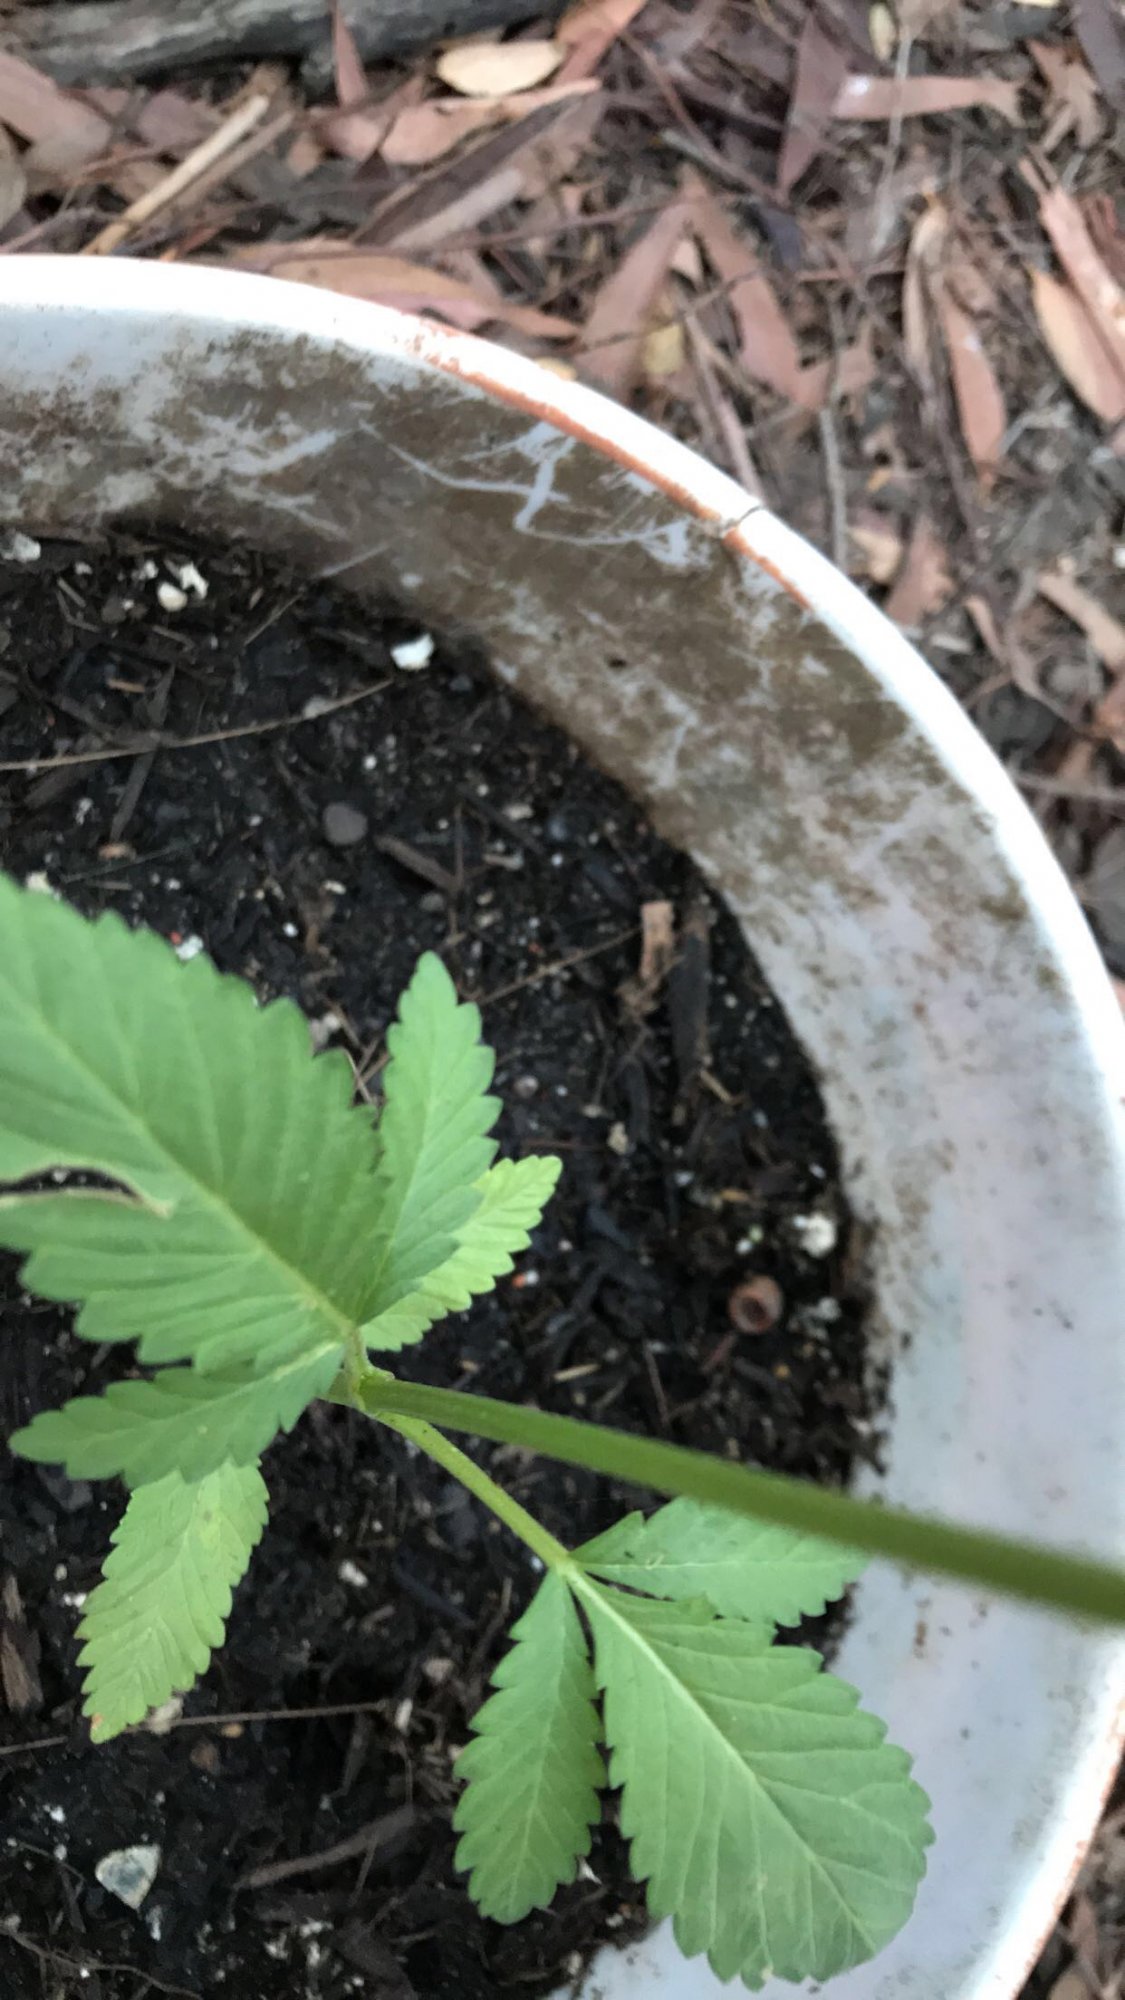 Not sure whats happening to my plant